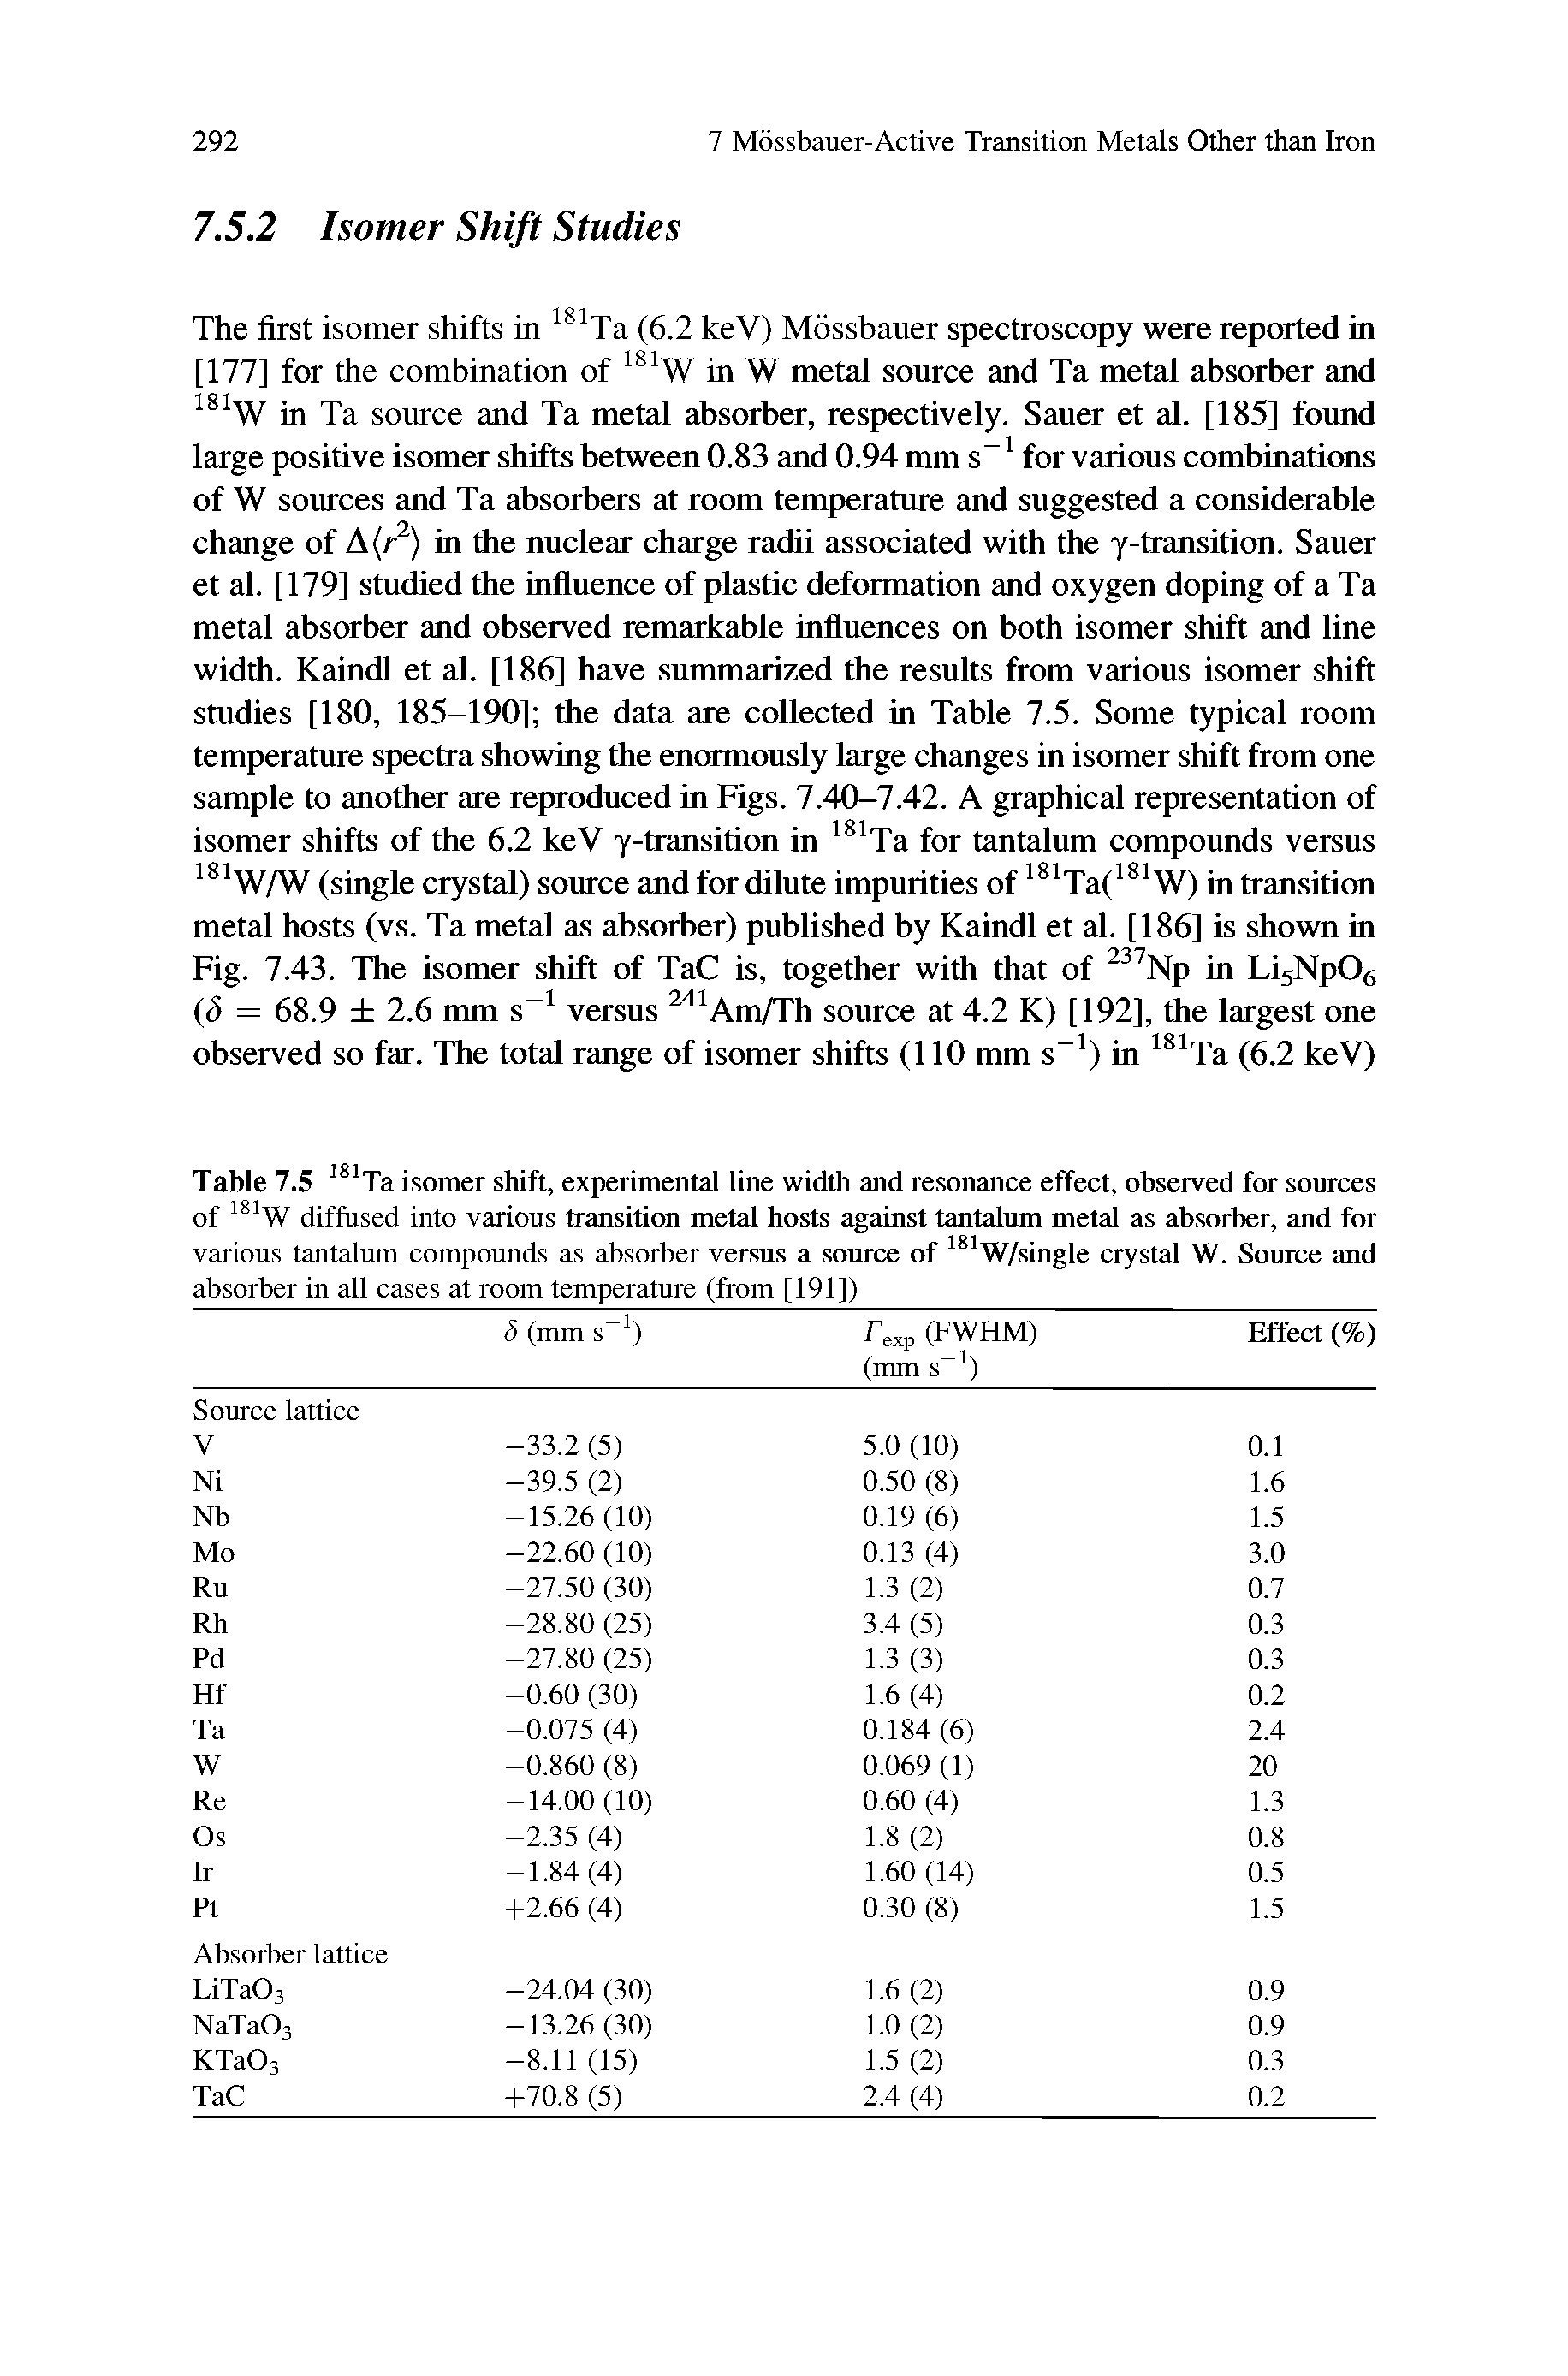 Table 7.5 ° Ta isomer shift, experimental line width and resonance effect, observed for sources of diffused into various transition metal hosts against tantalrun metal as absorber, and for...